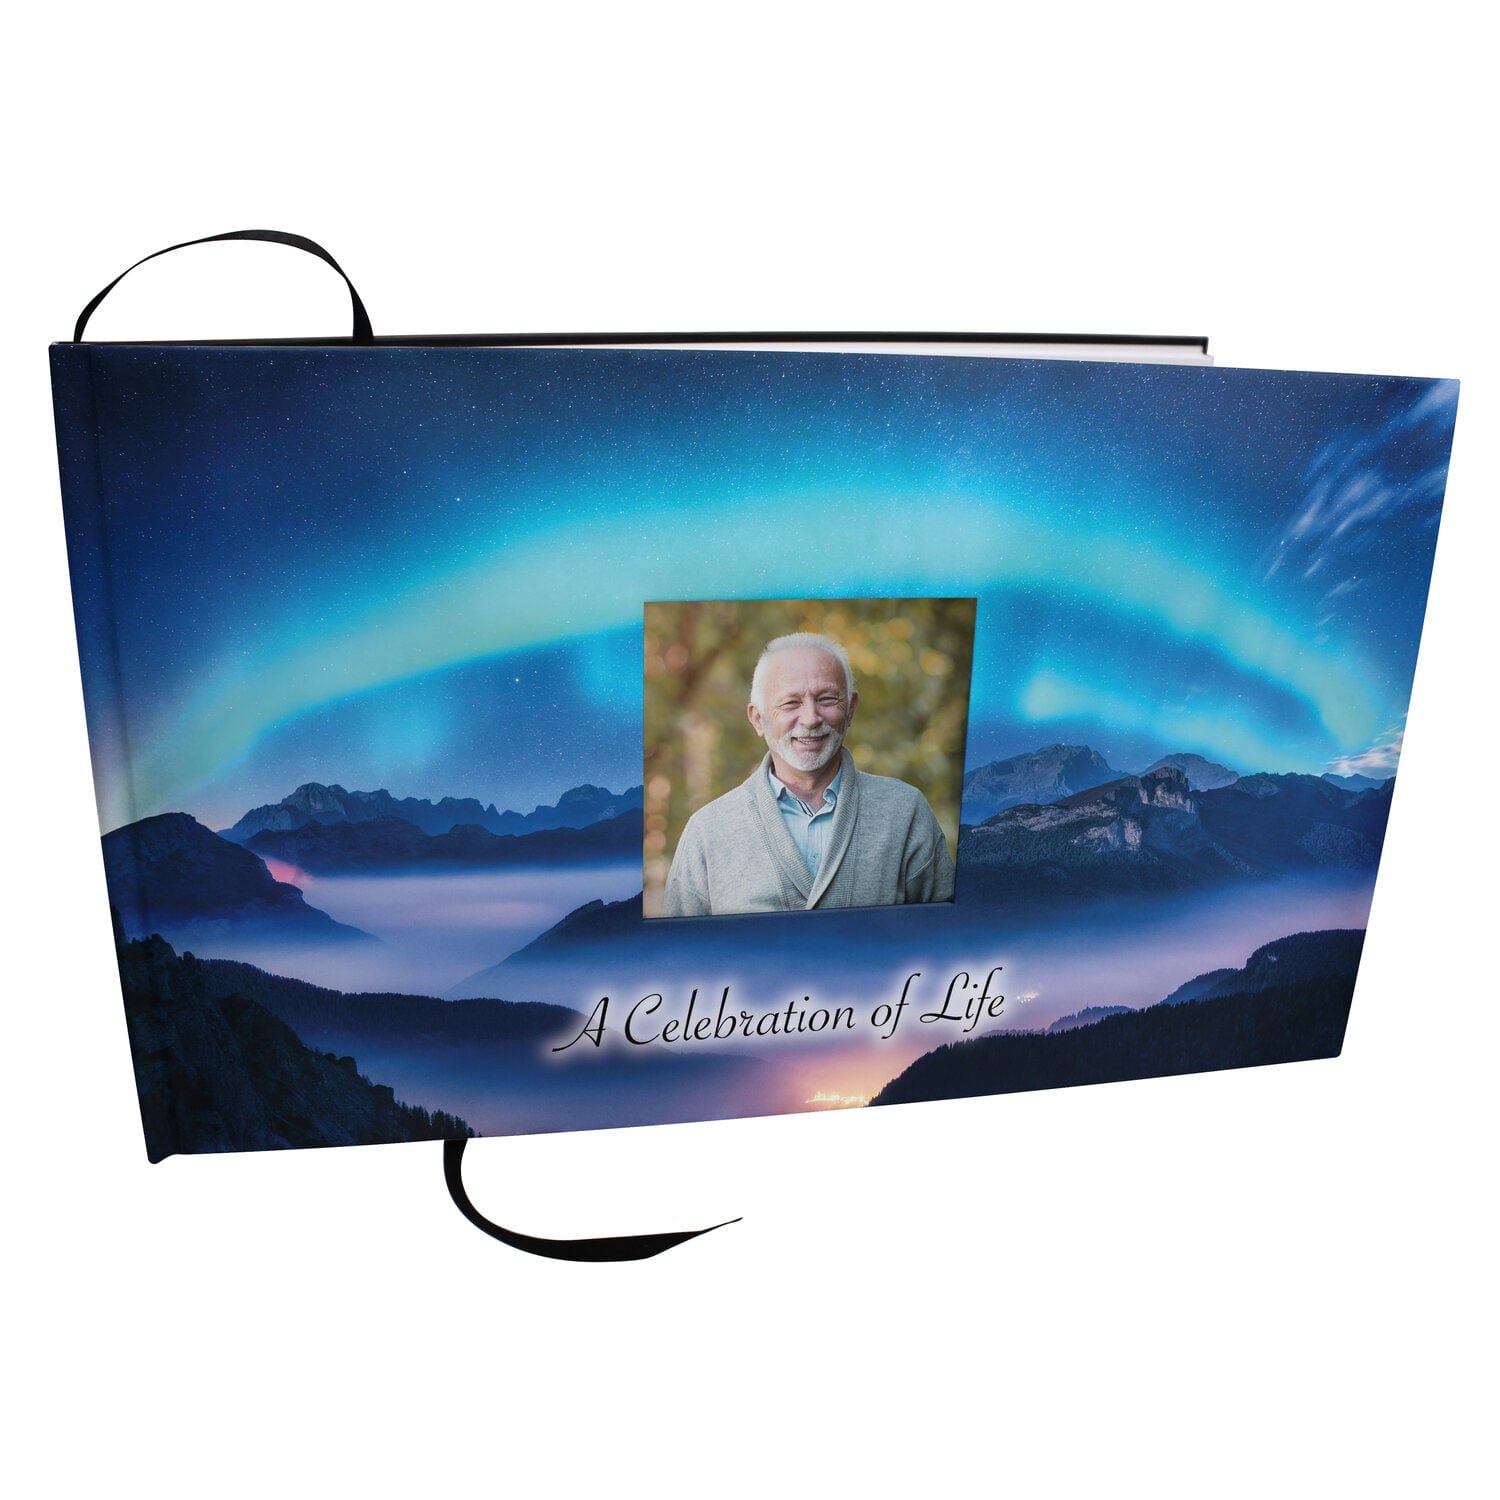 Commemorative Cremation Urns Aurora Borealis Matching Themed 'Celebration of Life' Guest Book for Funeral or Memorial Service